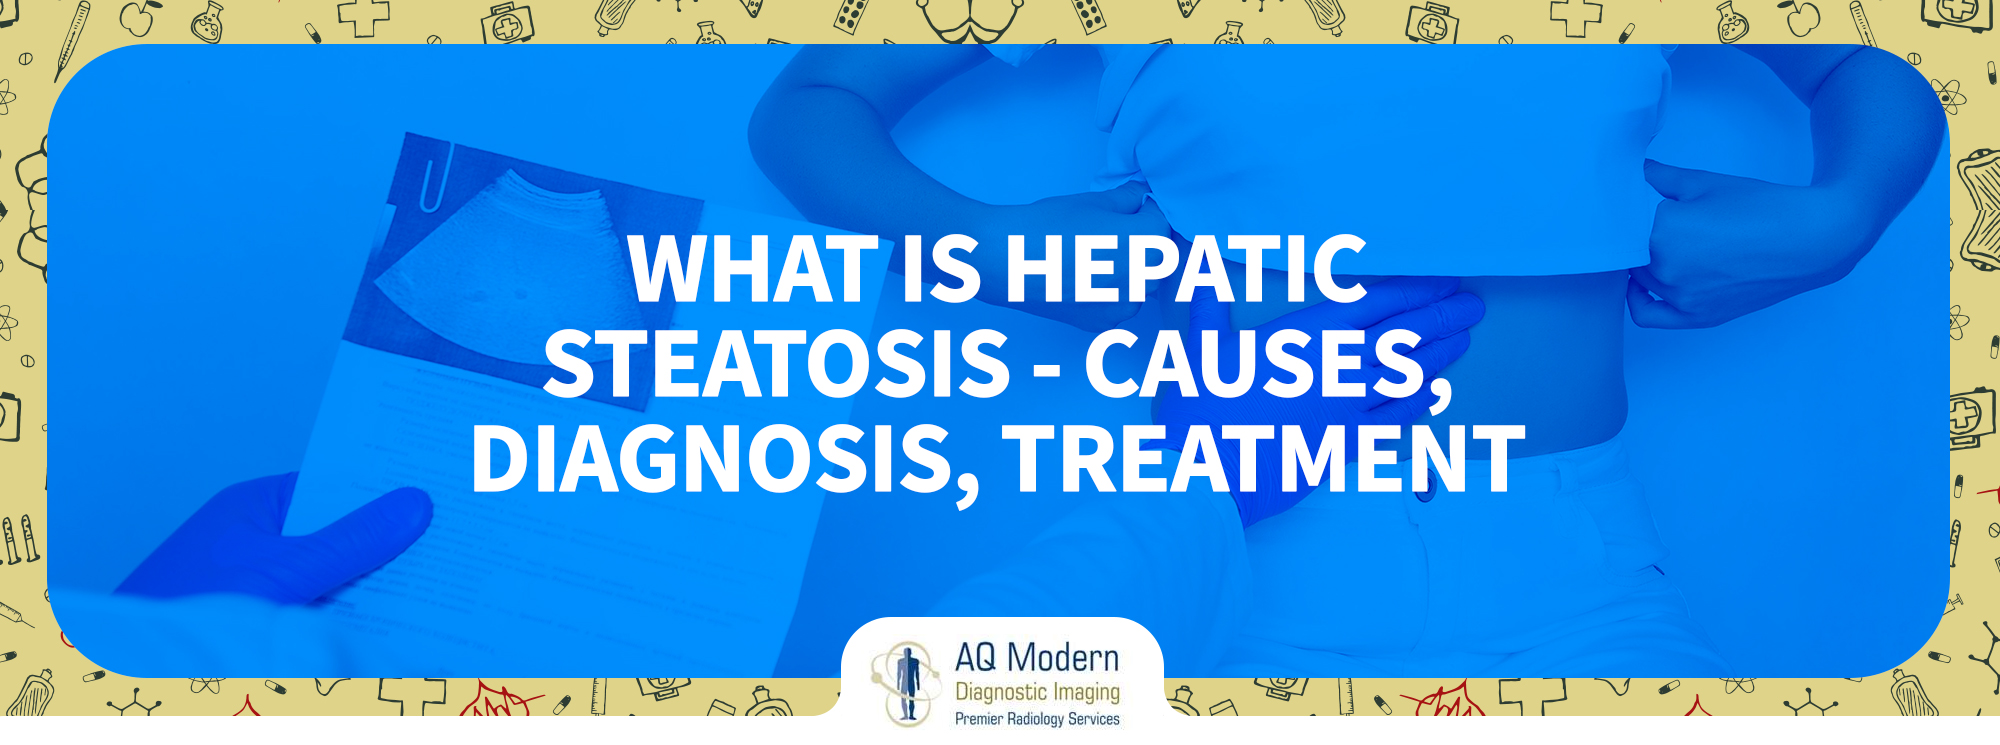 What Is Hepatic Steatosis - Causes, Diagnosis, Treatment